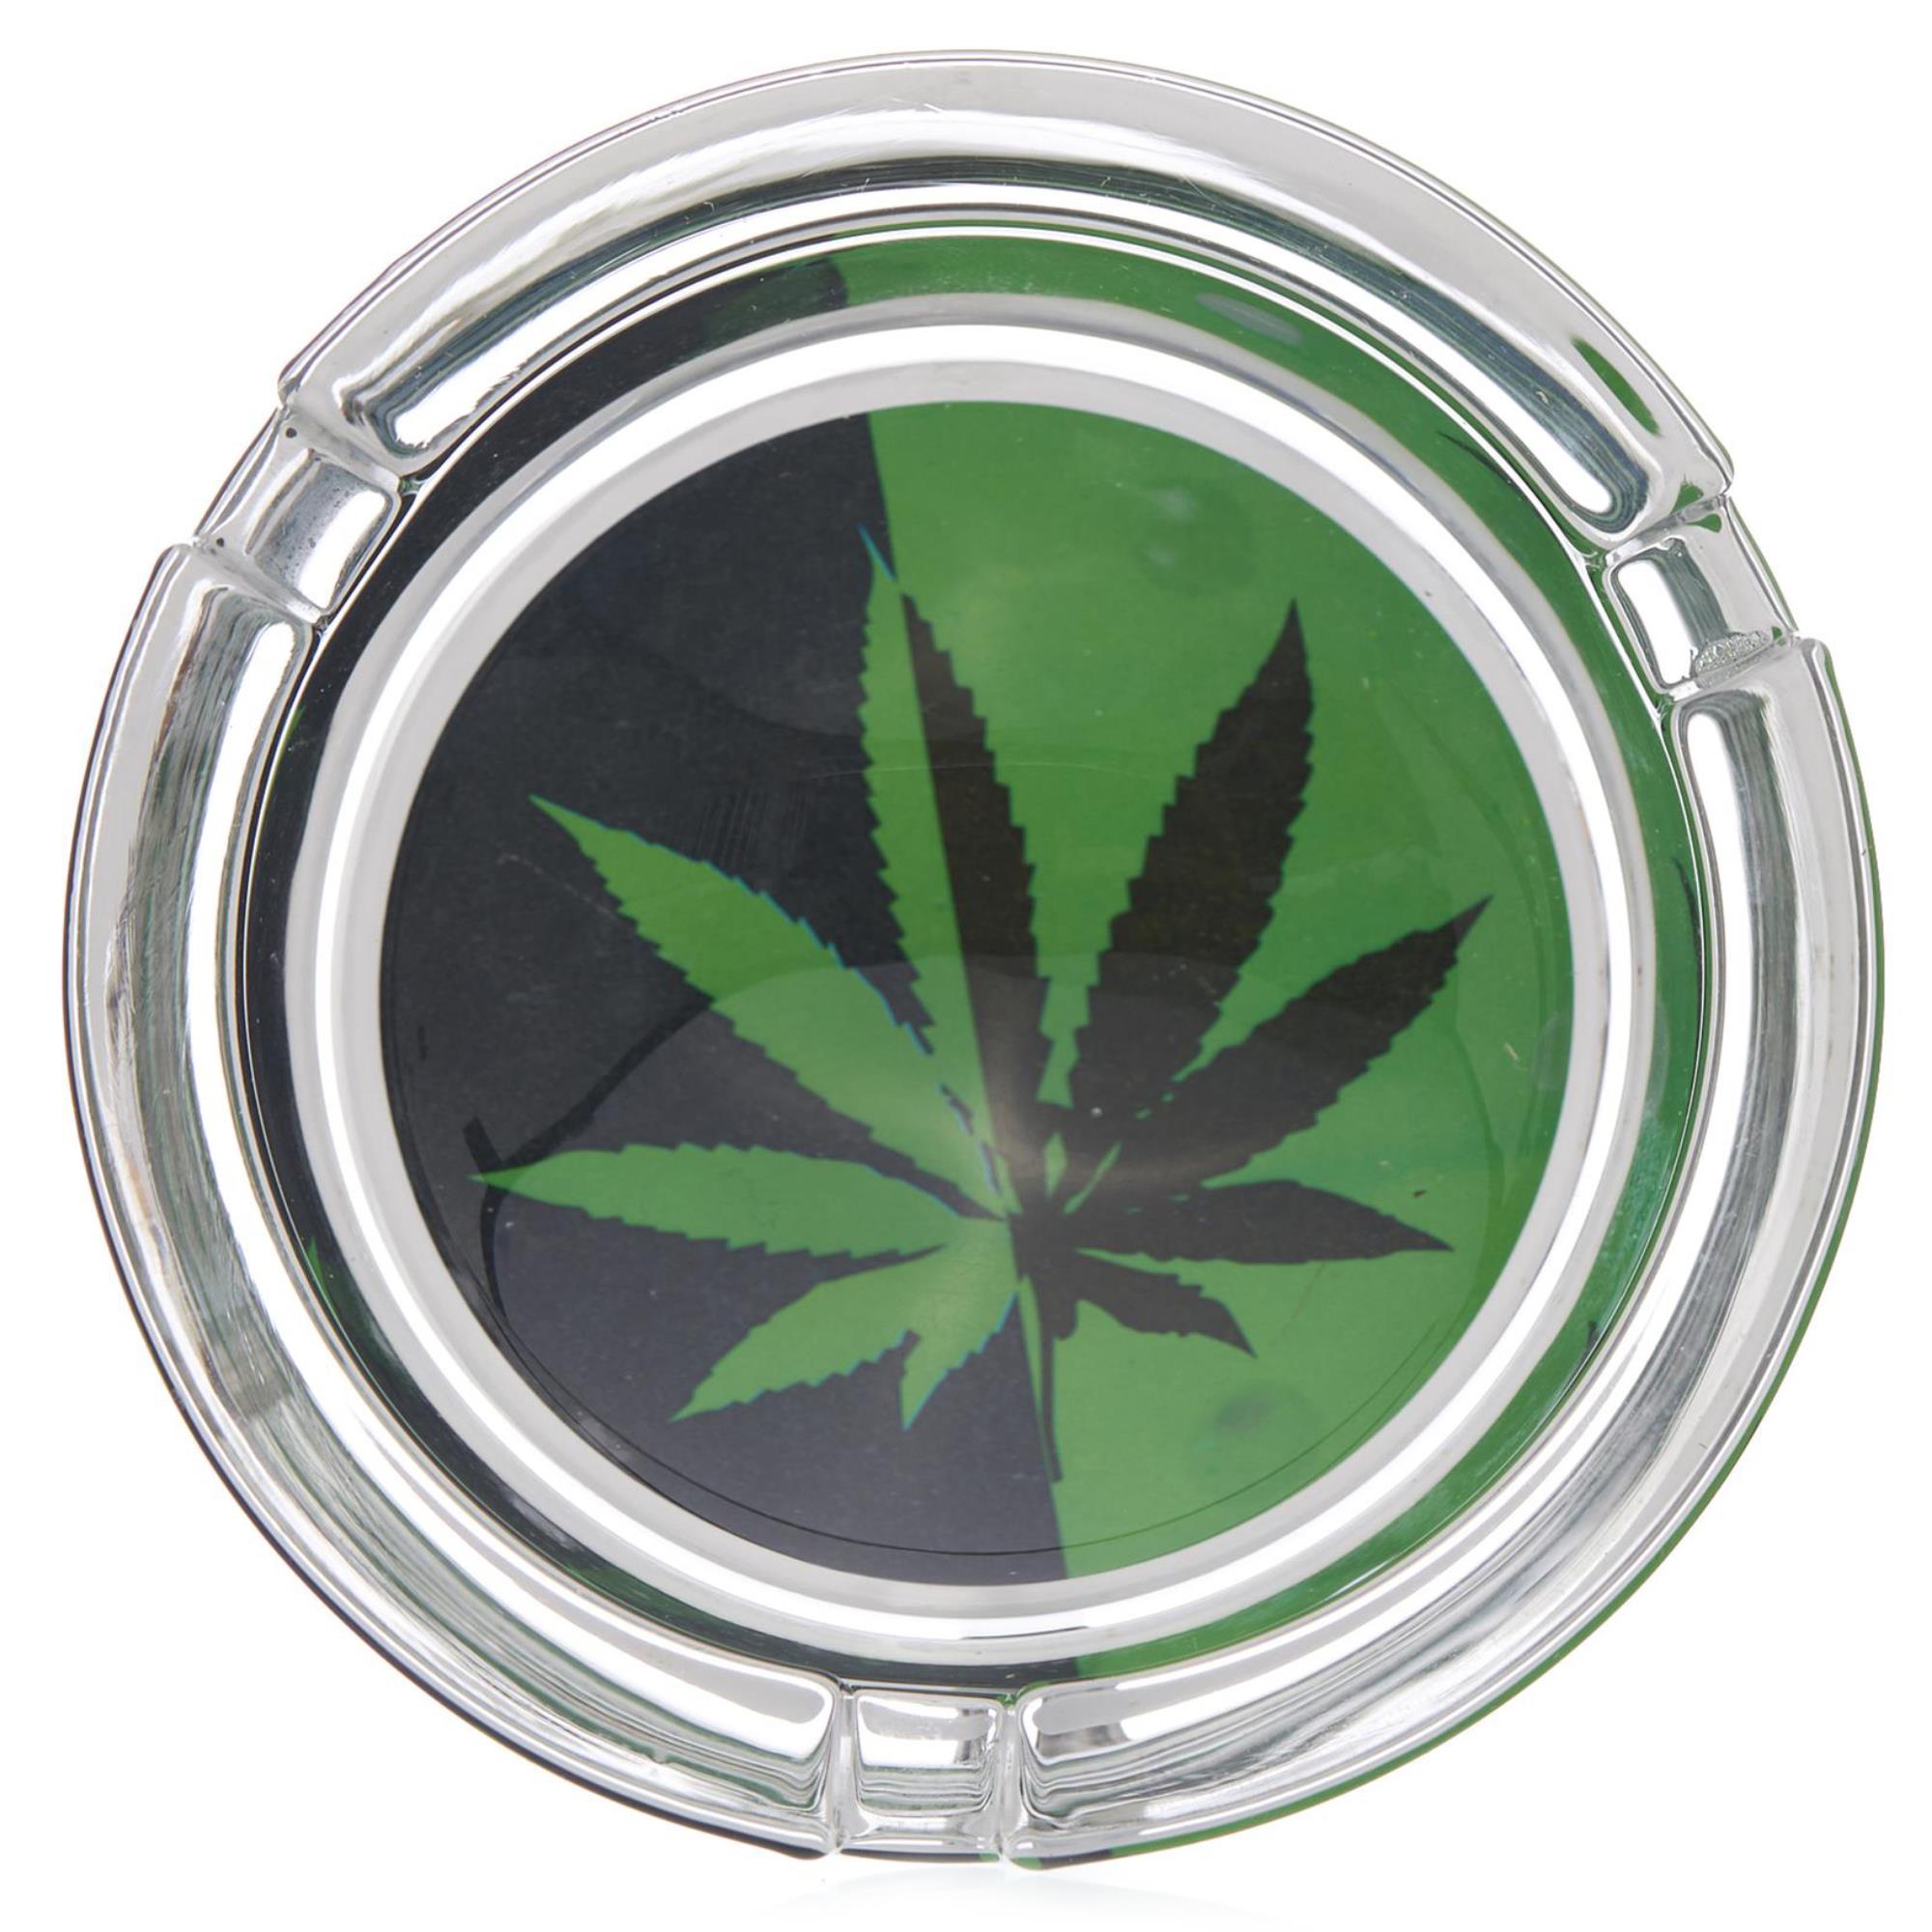 WEED POWER GLASS ASHTRAY